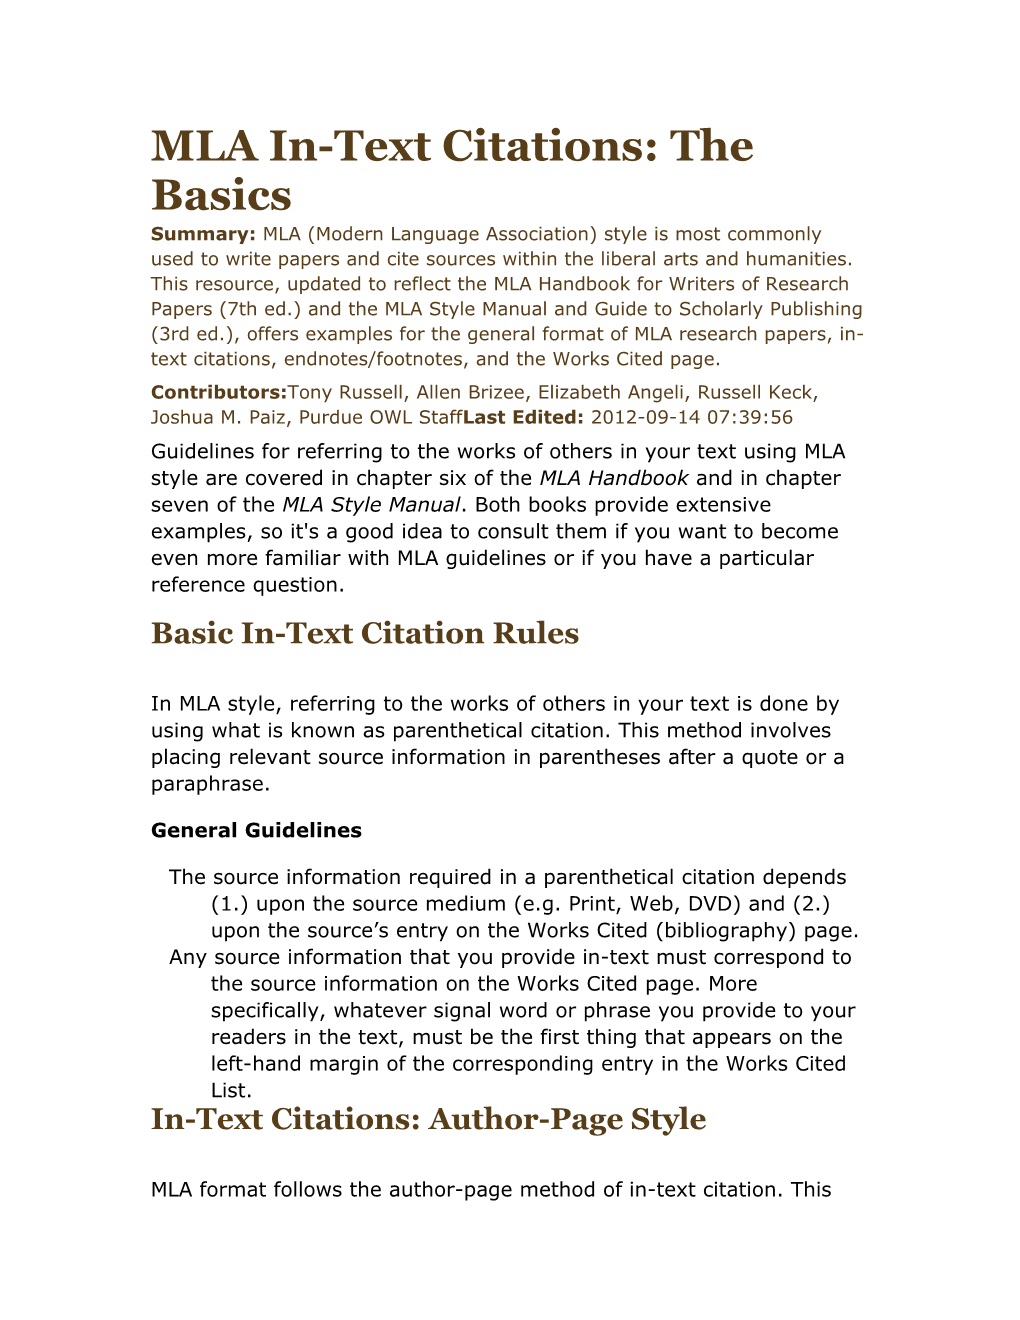 MLA In-Text Citations: the Basics